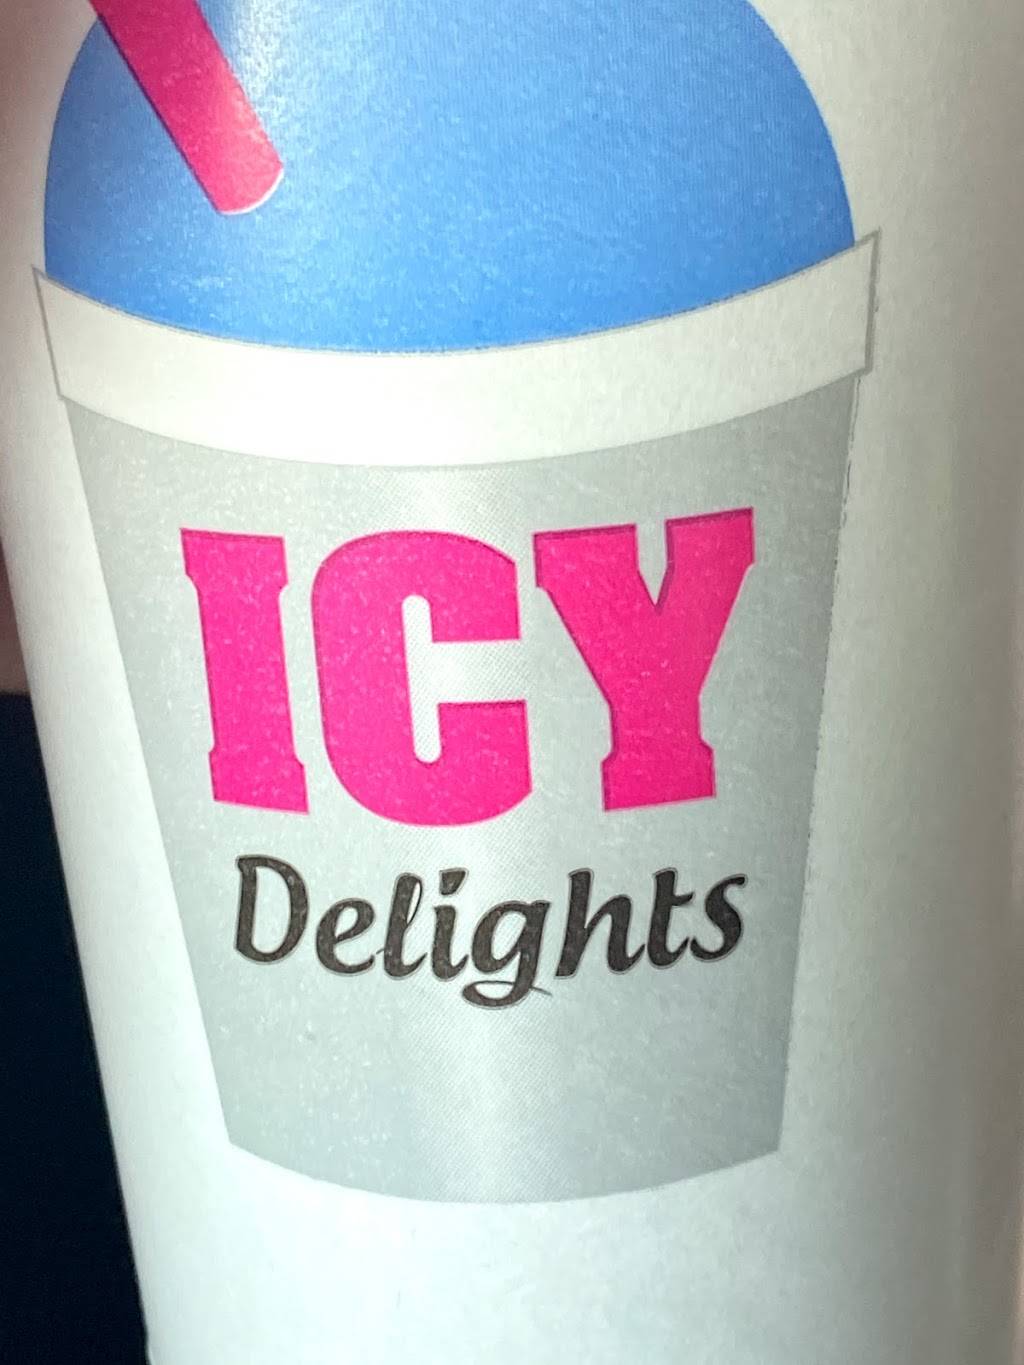 Icy Delights | 6241 Kenwood Ave, Rosedale, MD 21237 | Phone: (443) 987-5705